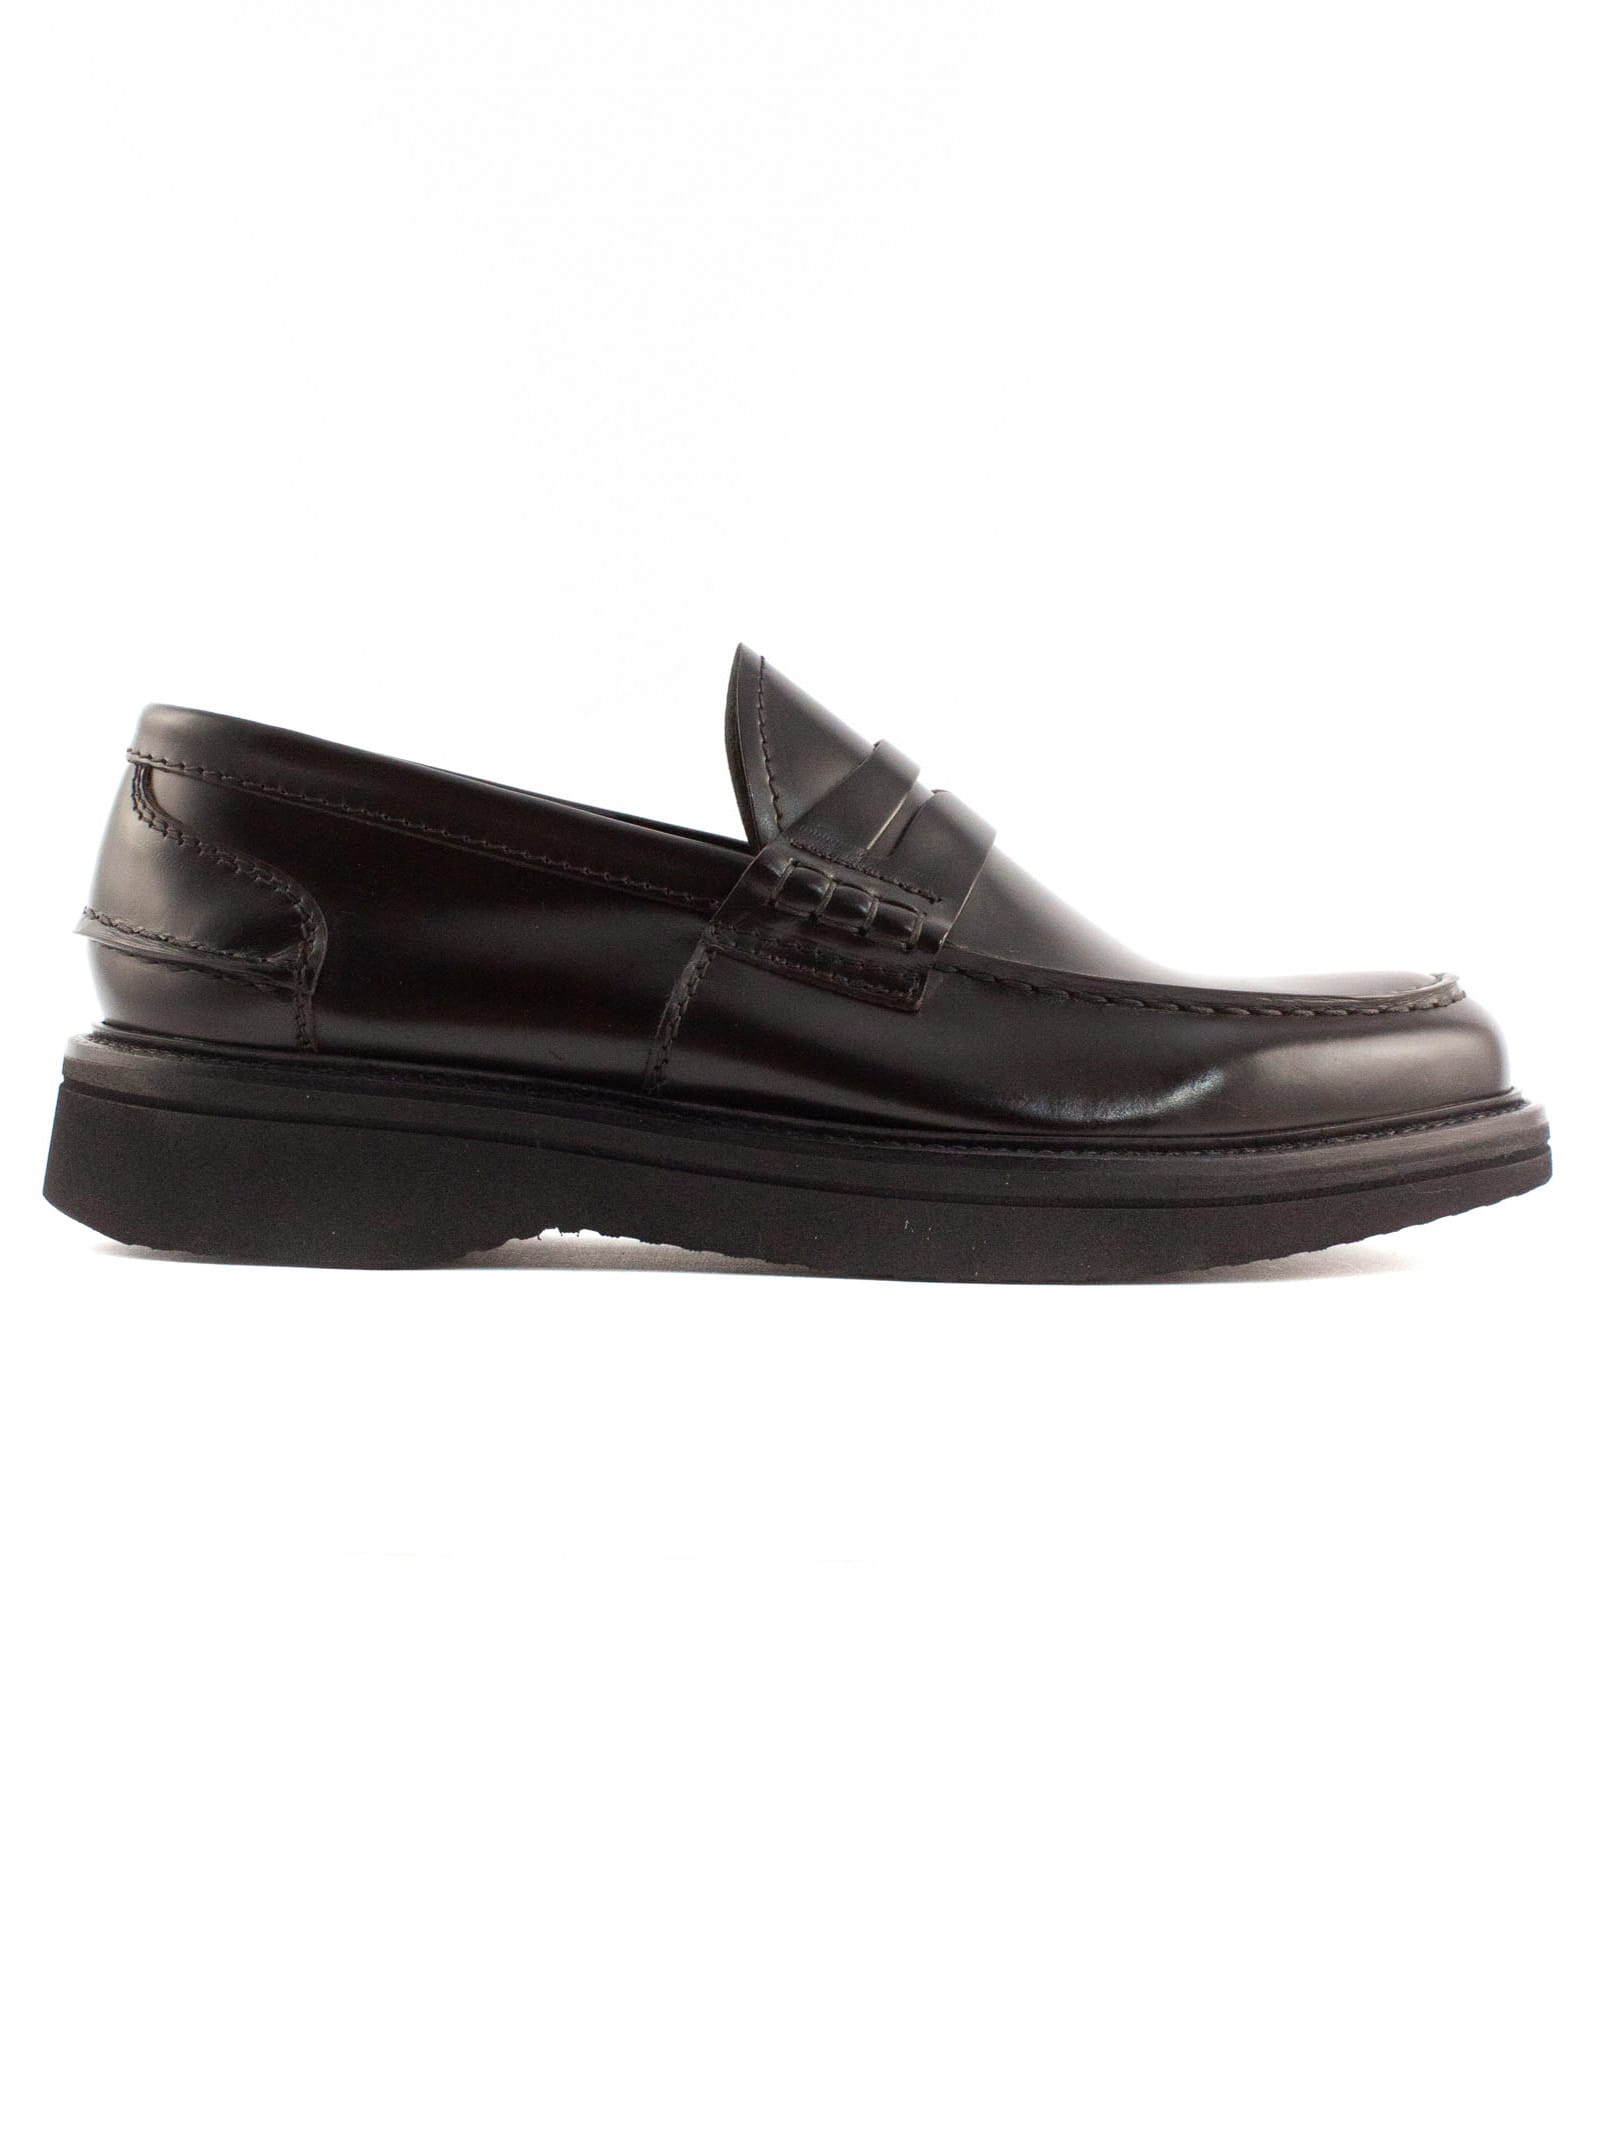 Green George Dark Brown Shiny Leather Loafer